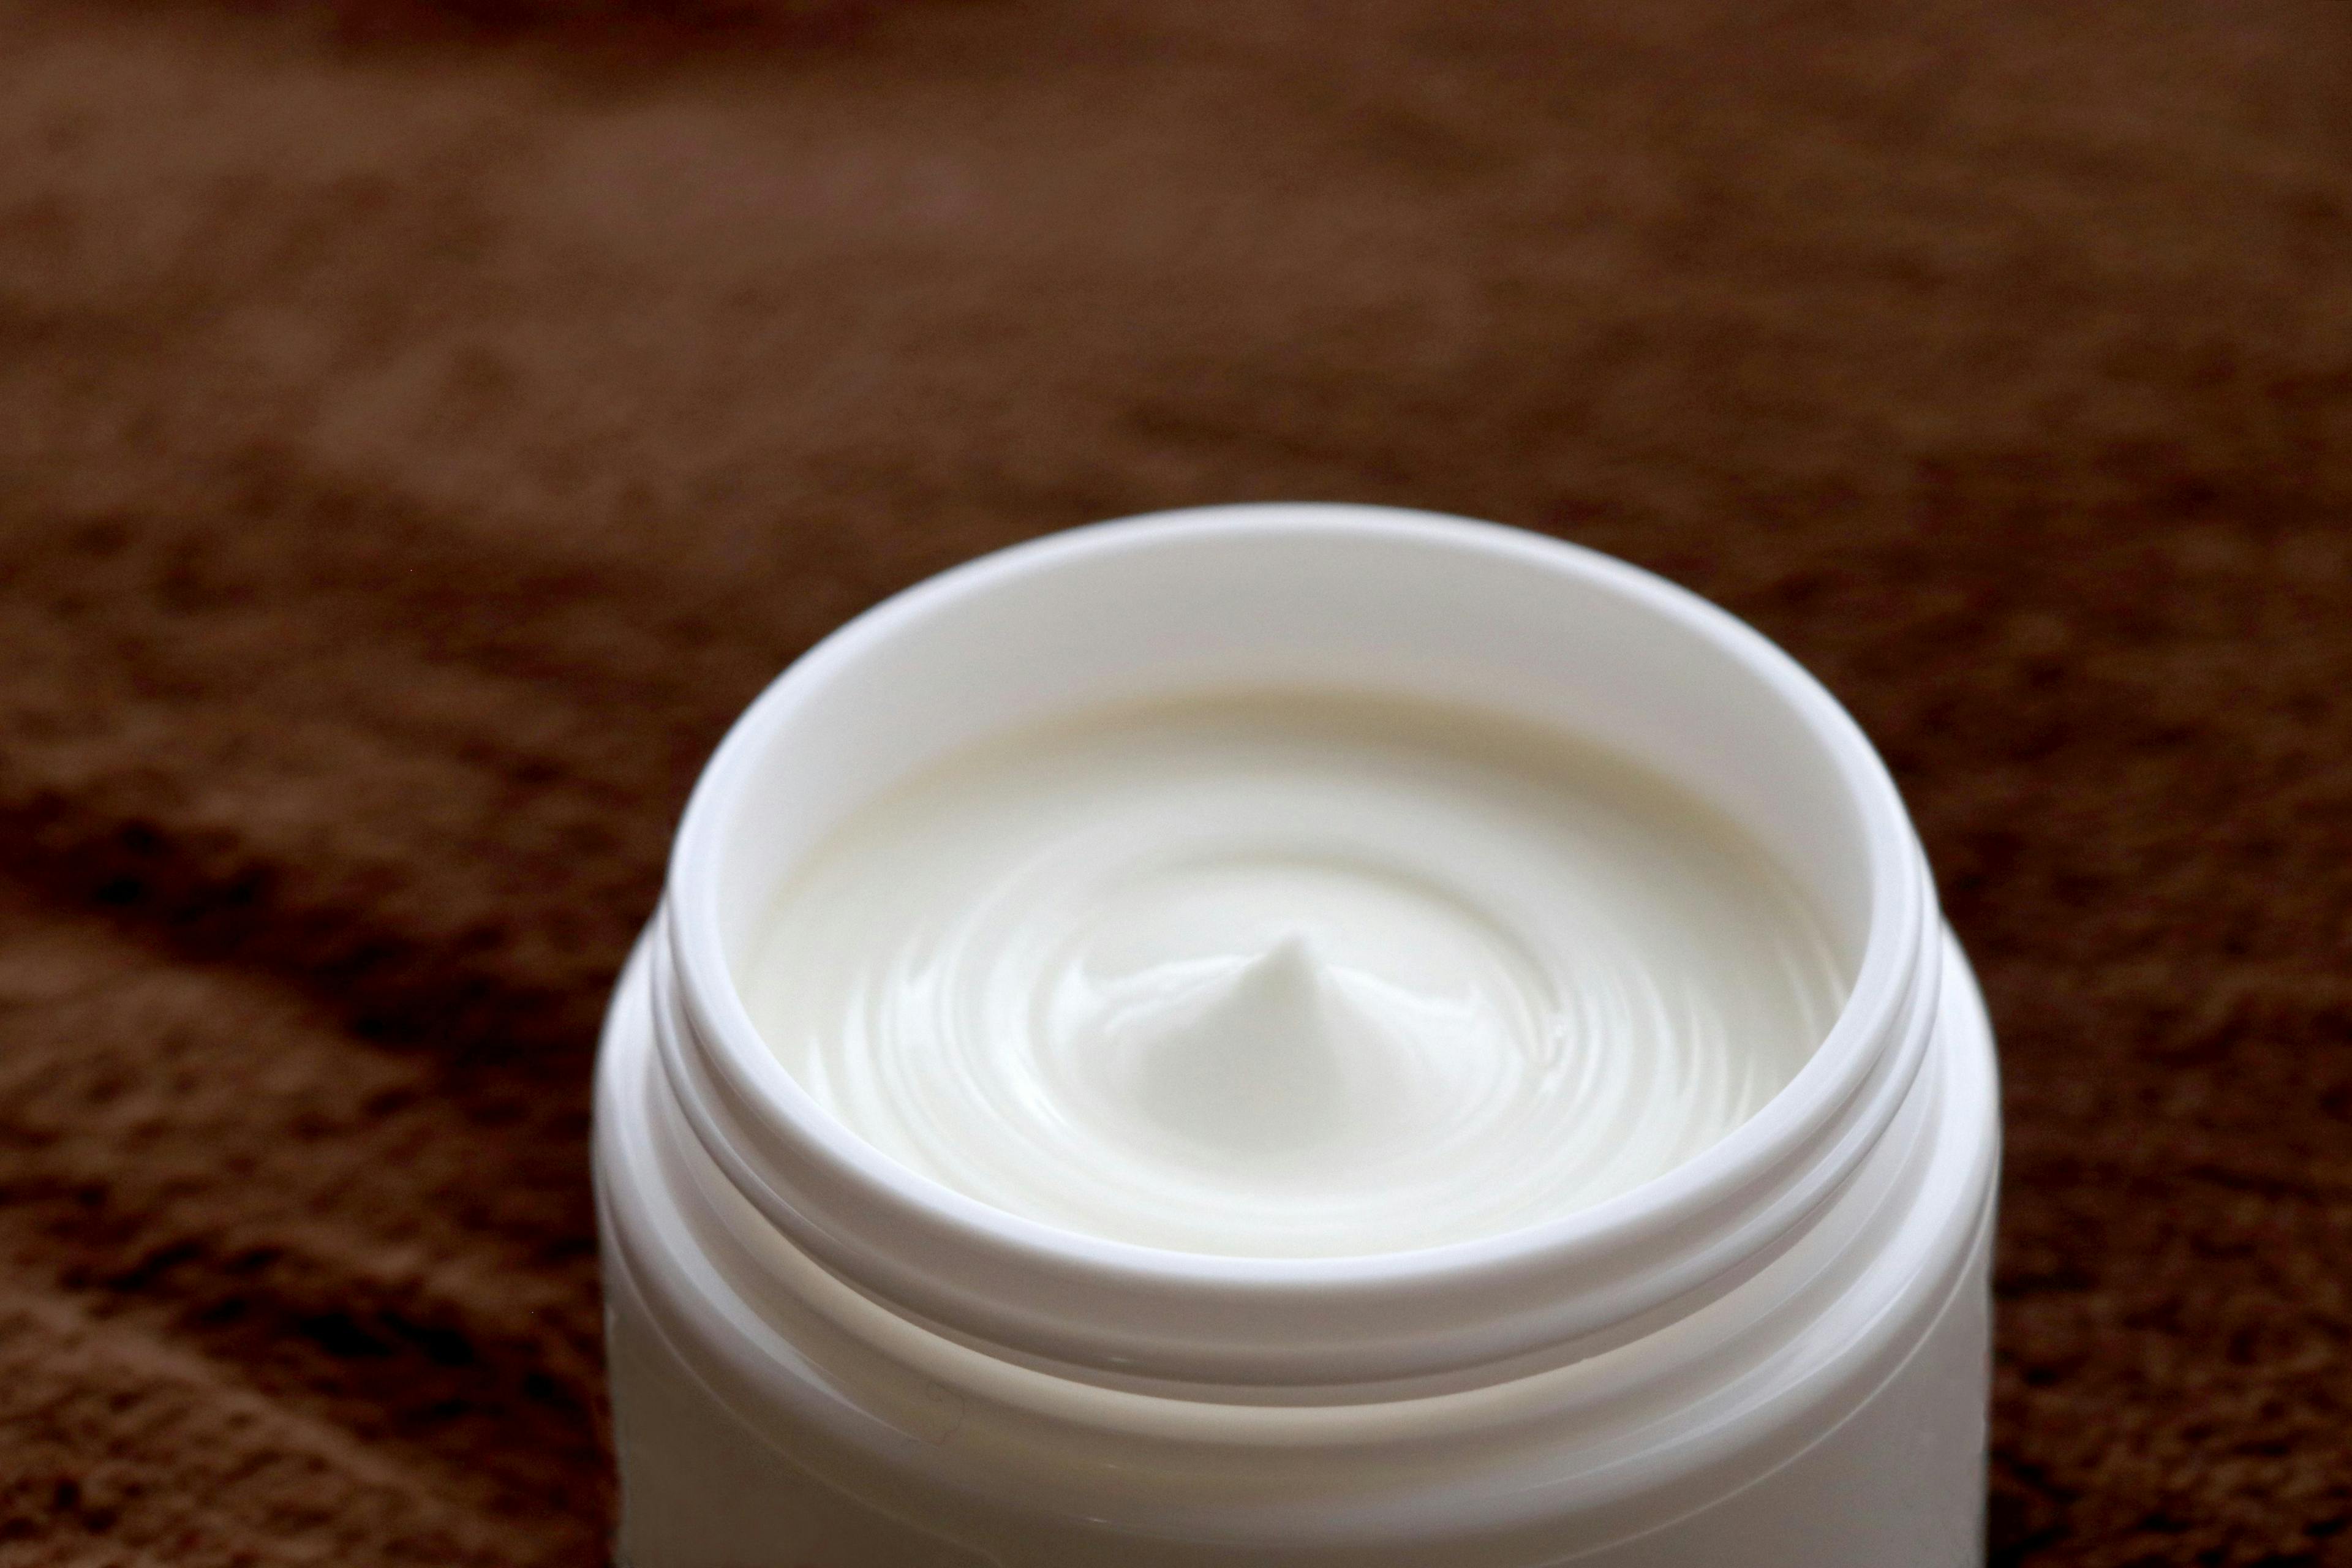 Unlabeled container of skin cream